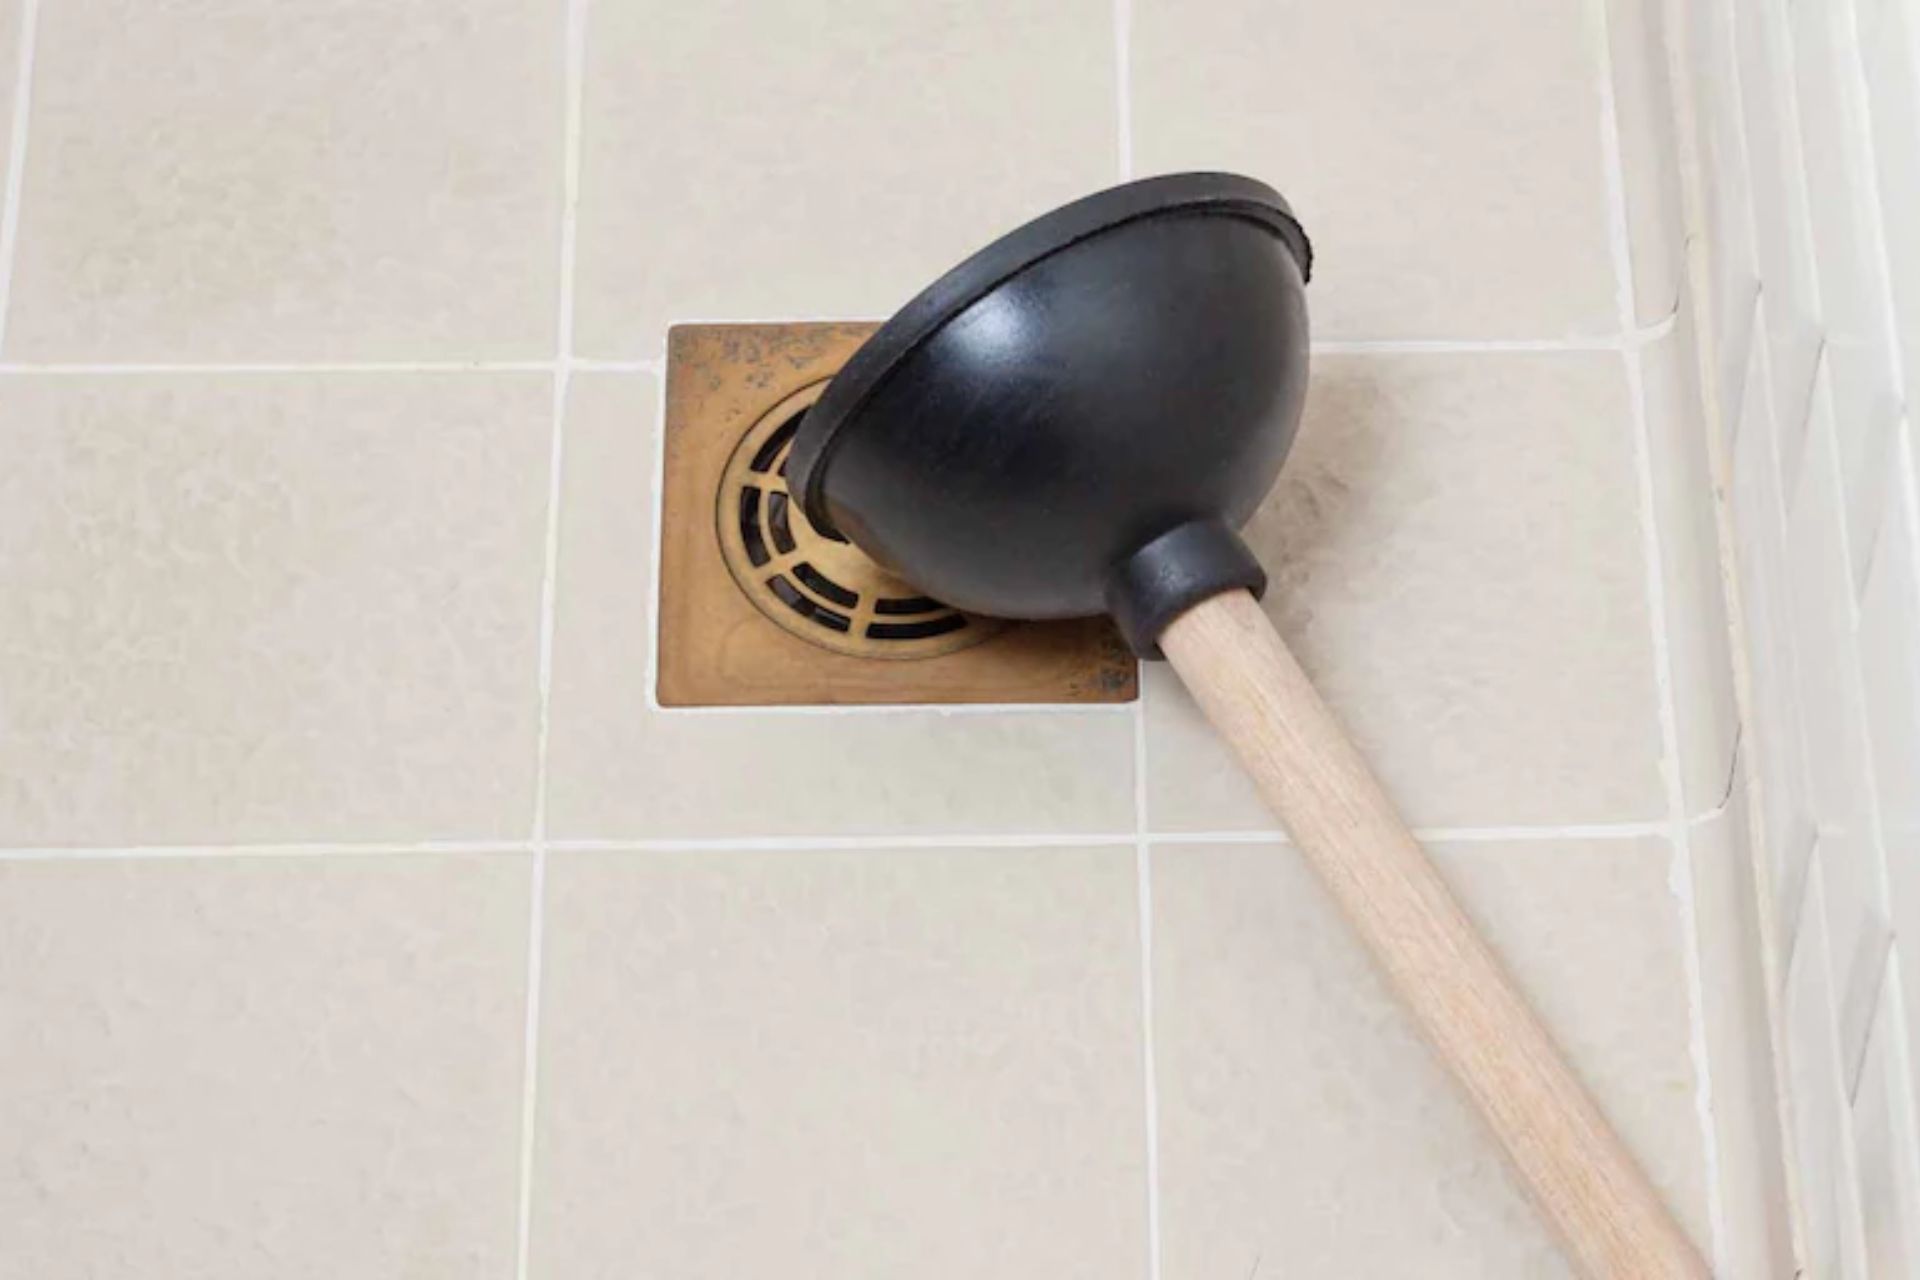 how to unclog shower drain